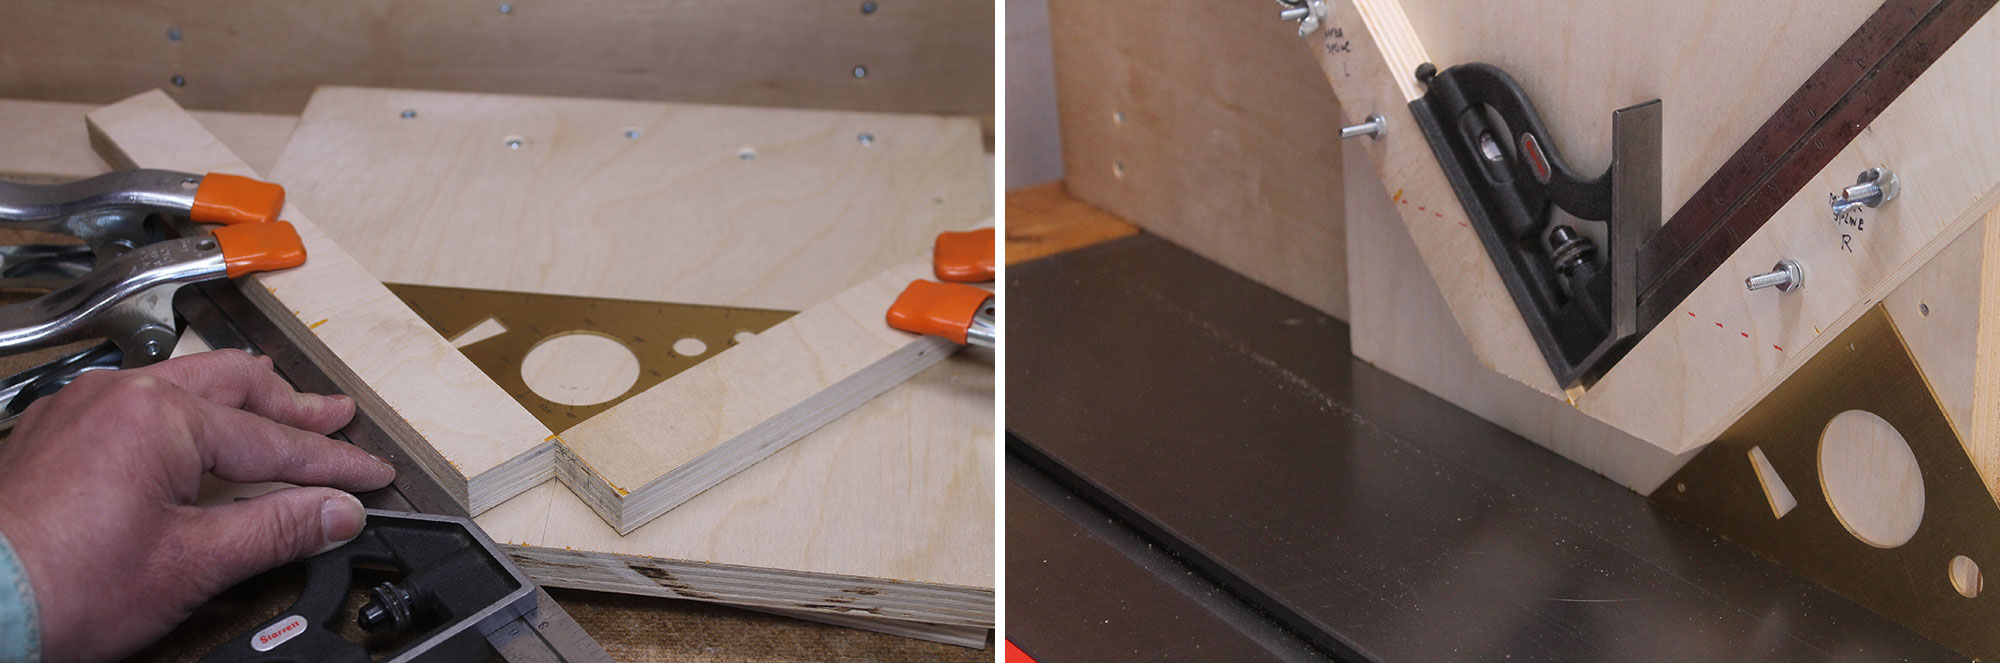 Image left: V-cradle clamped on carrier board. Image right: V-cradle on table saw with square.